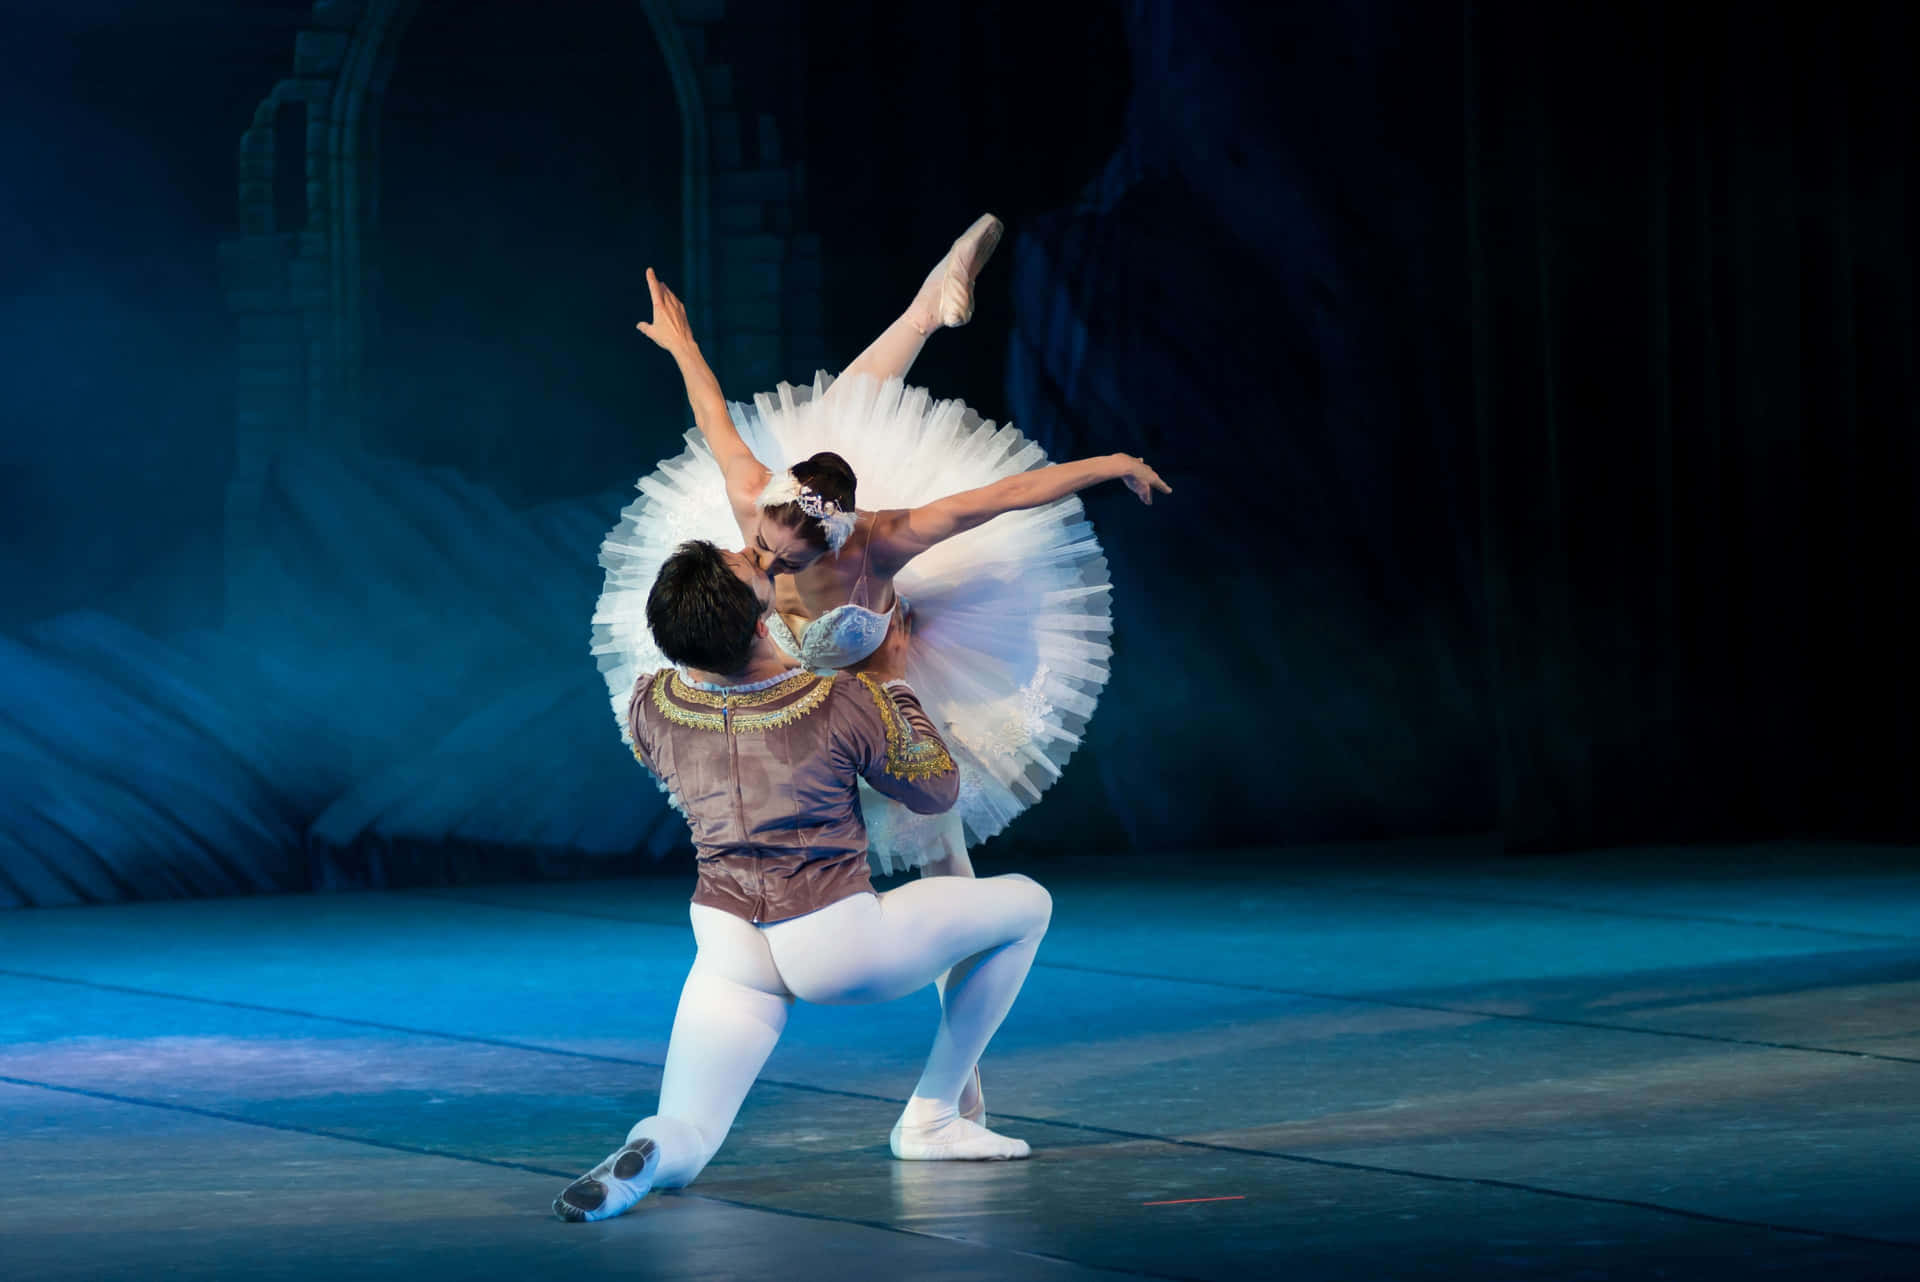 A Couple Of Ballet Dancers Performing On Stage